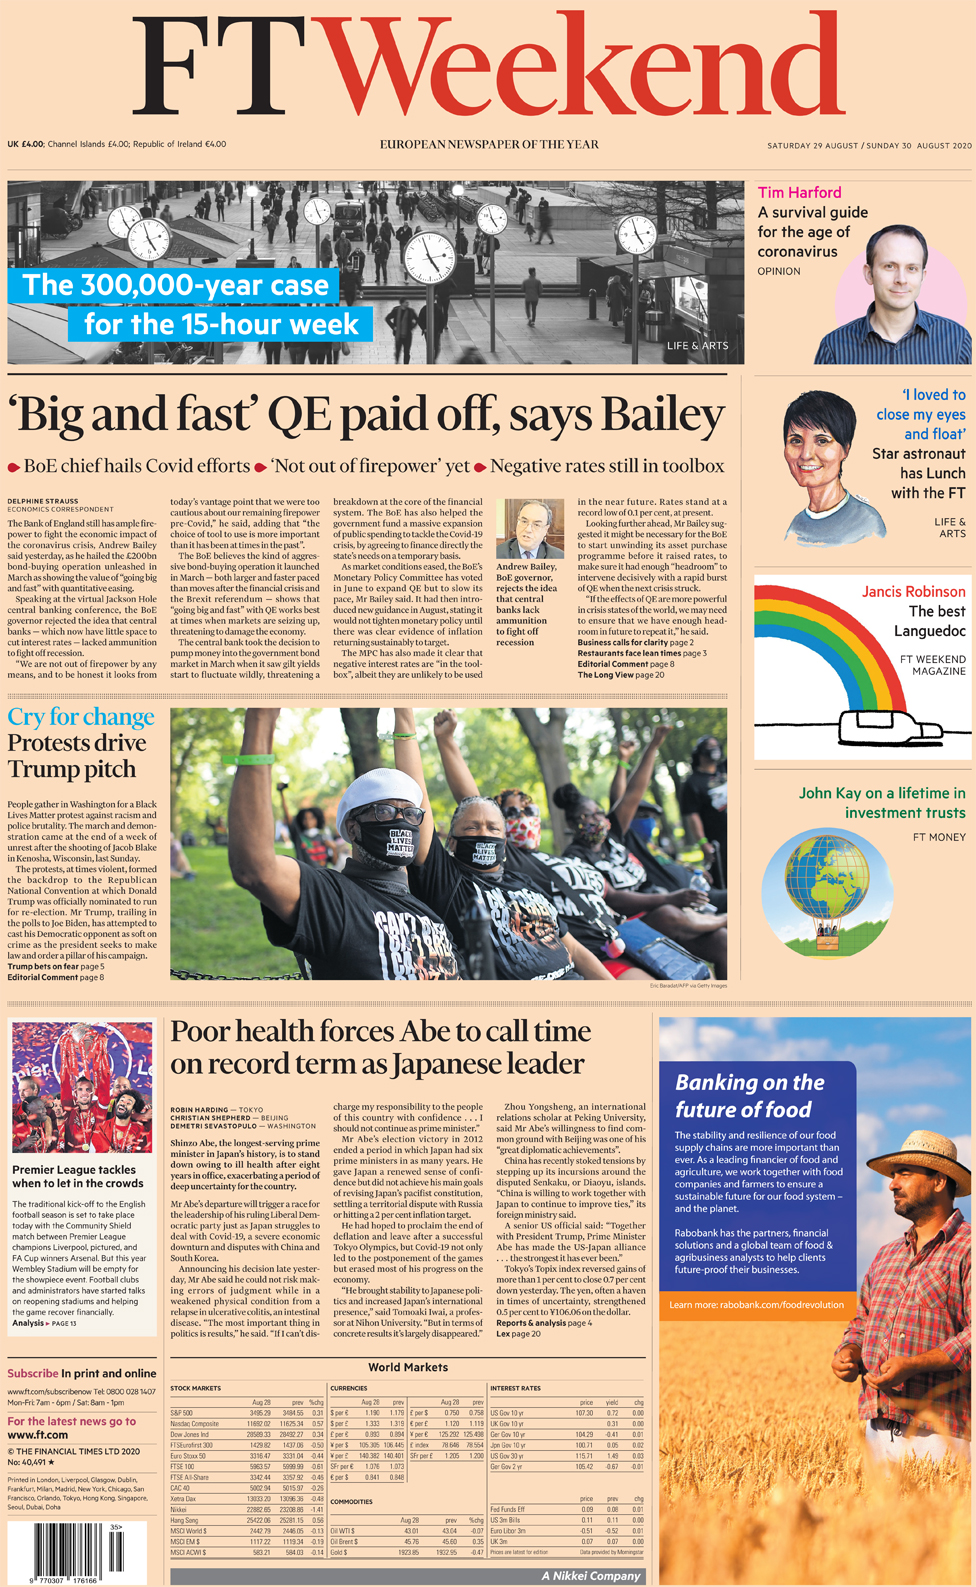 The FT Weekend front page 29 August 2021